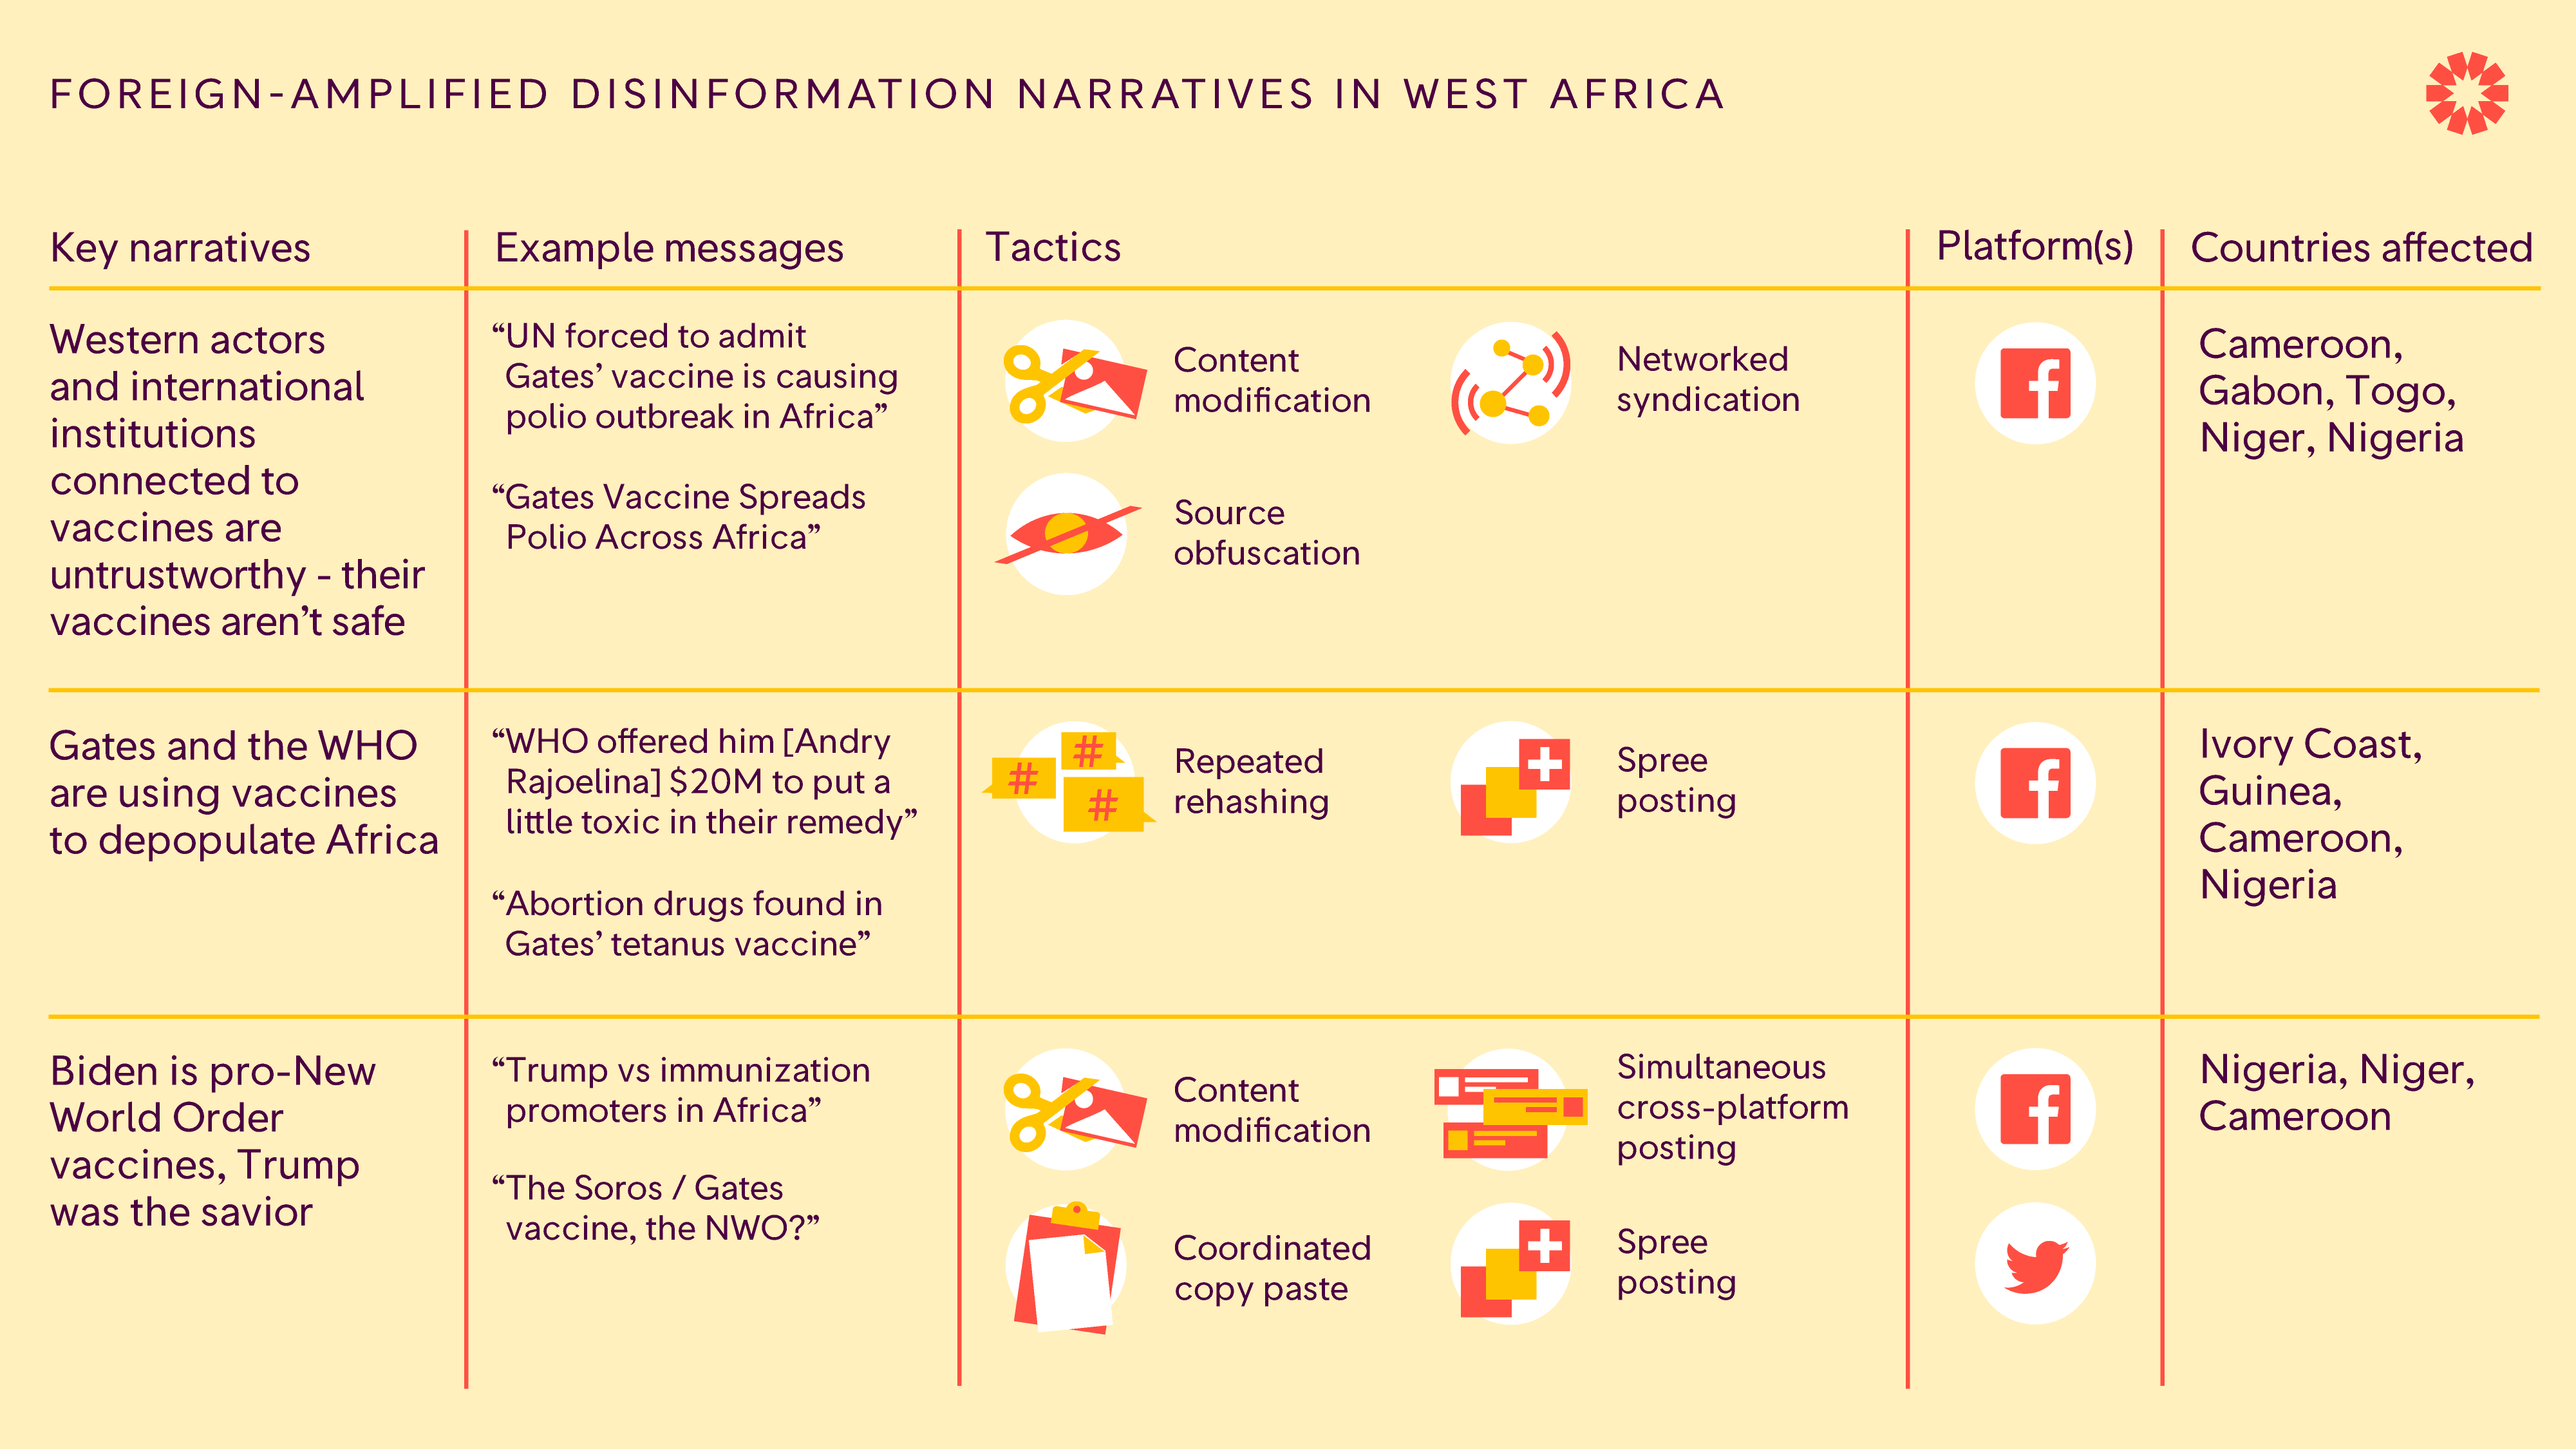 Foreign-amplified disinformation narratives in West Africa.